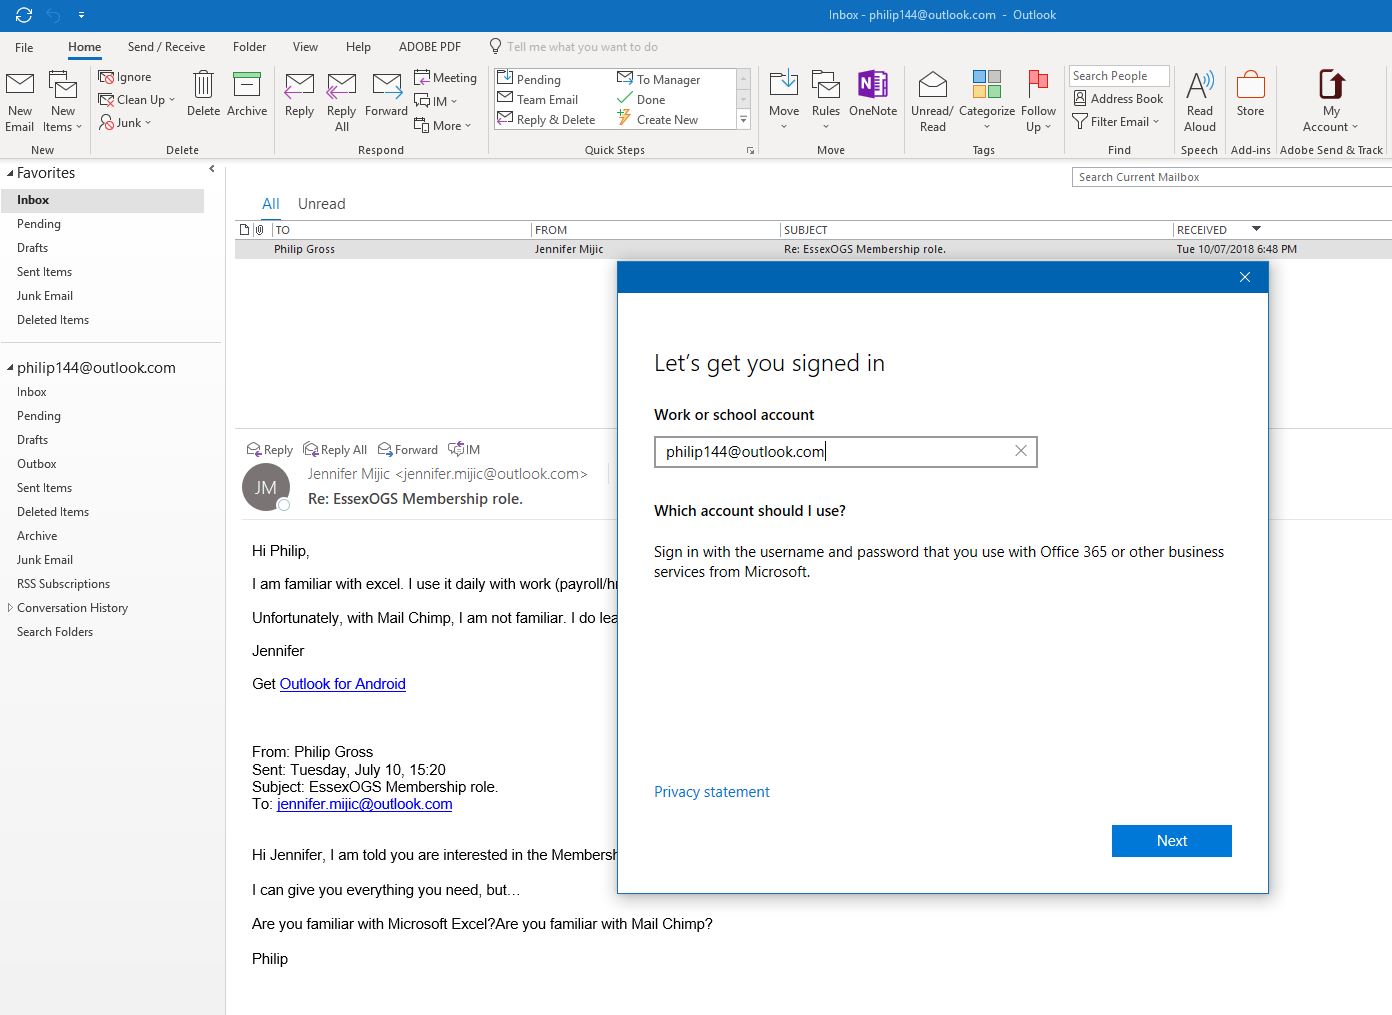 Outlook in Office 365 is acting up when i log into me email